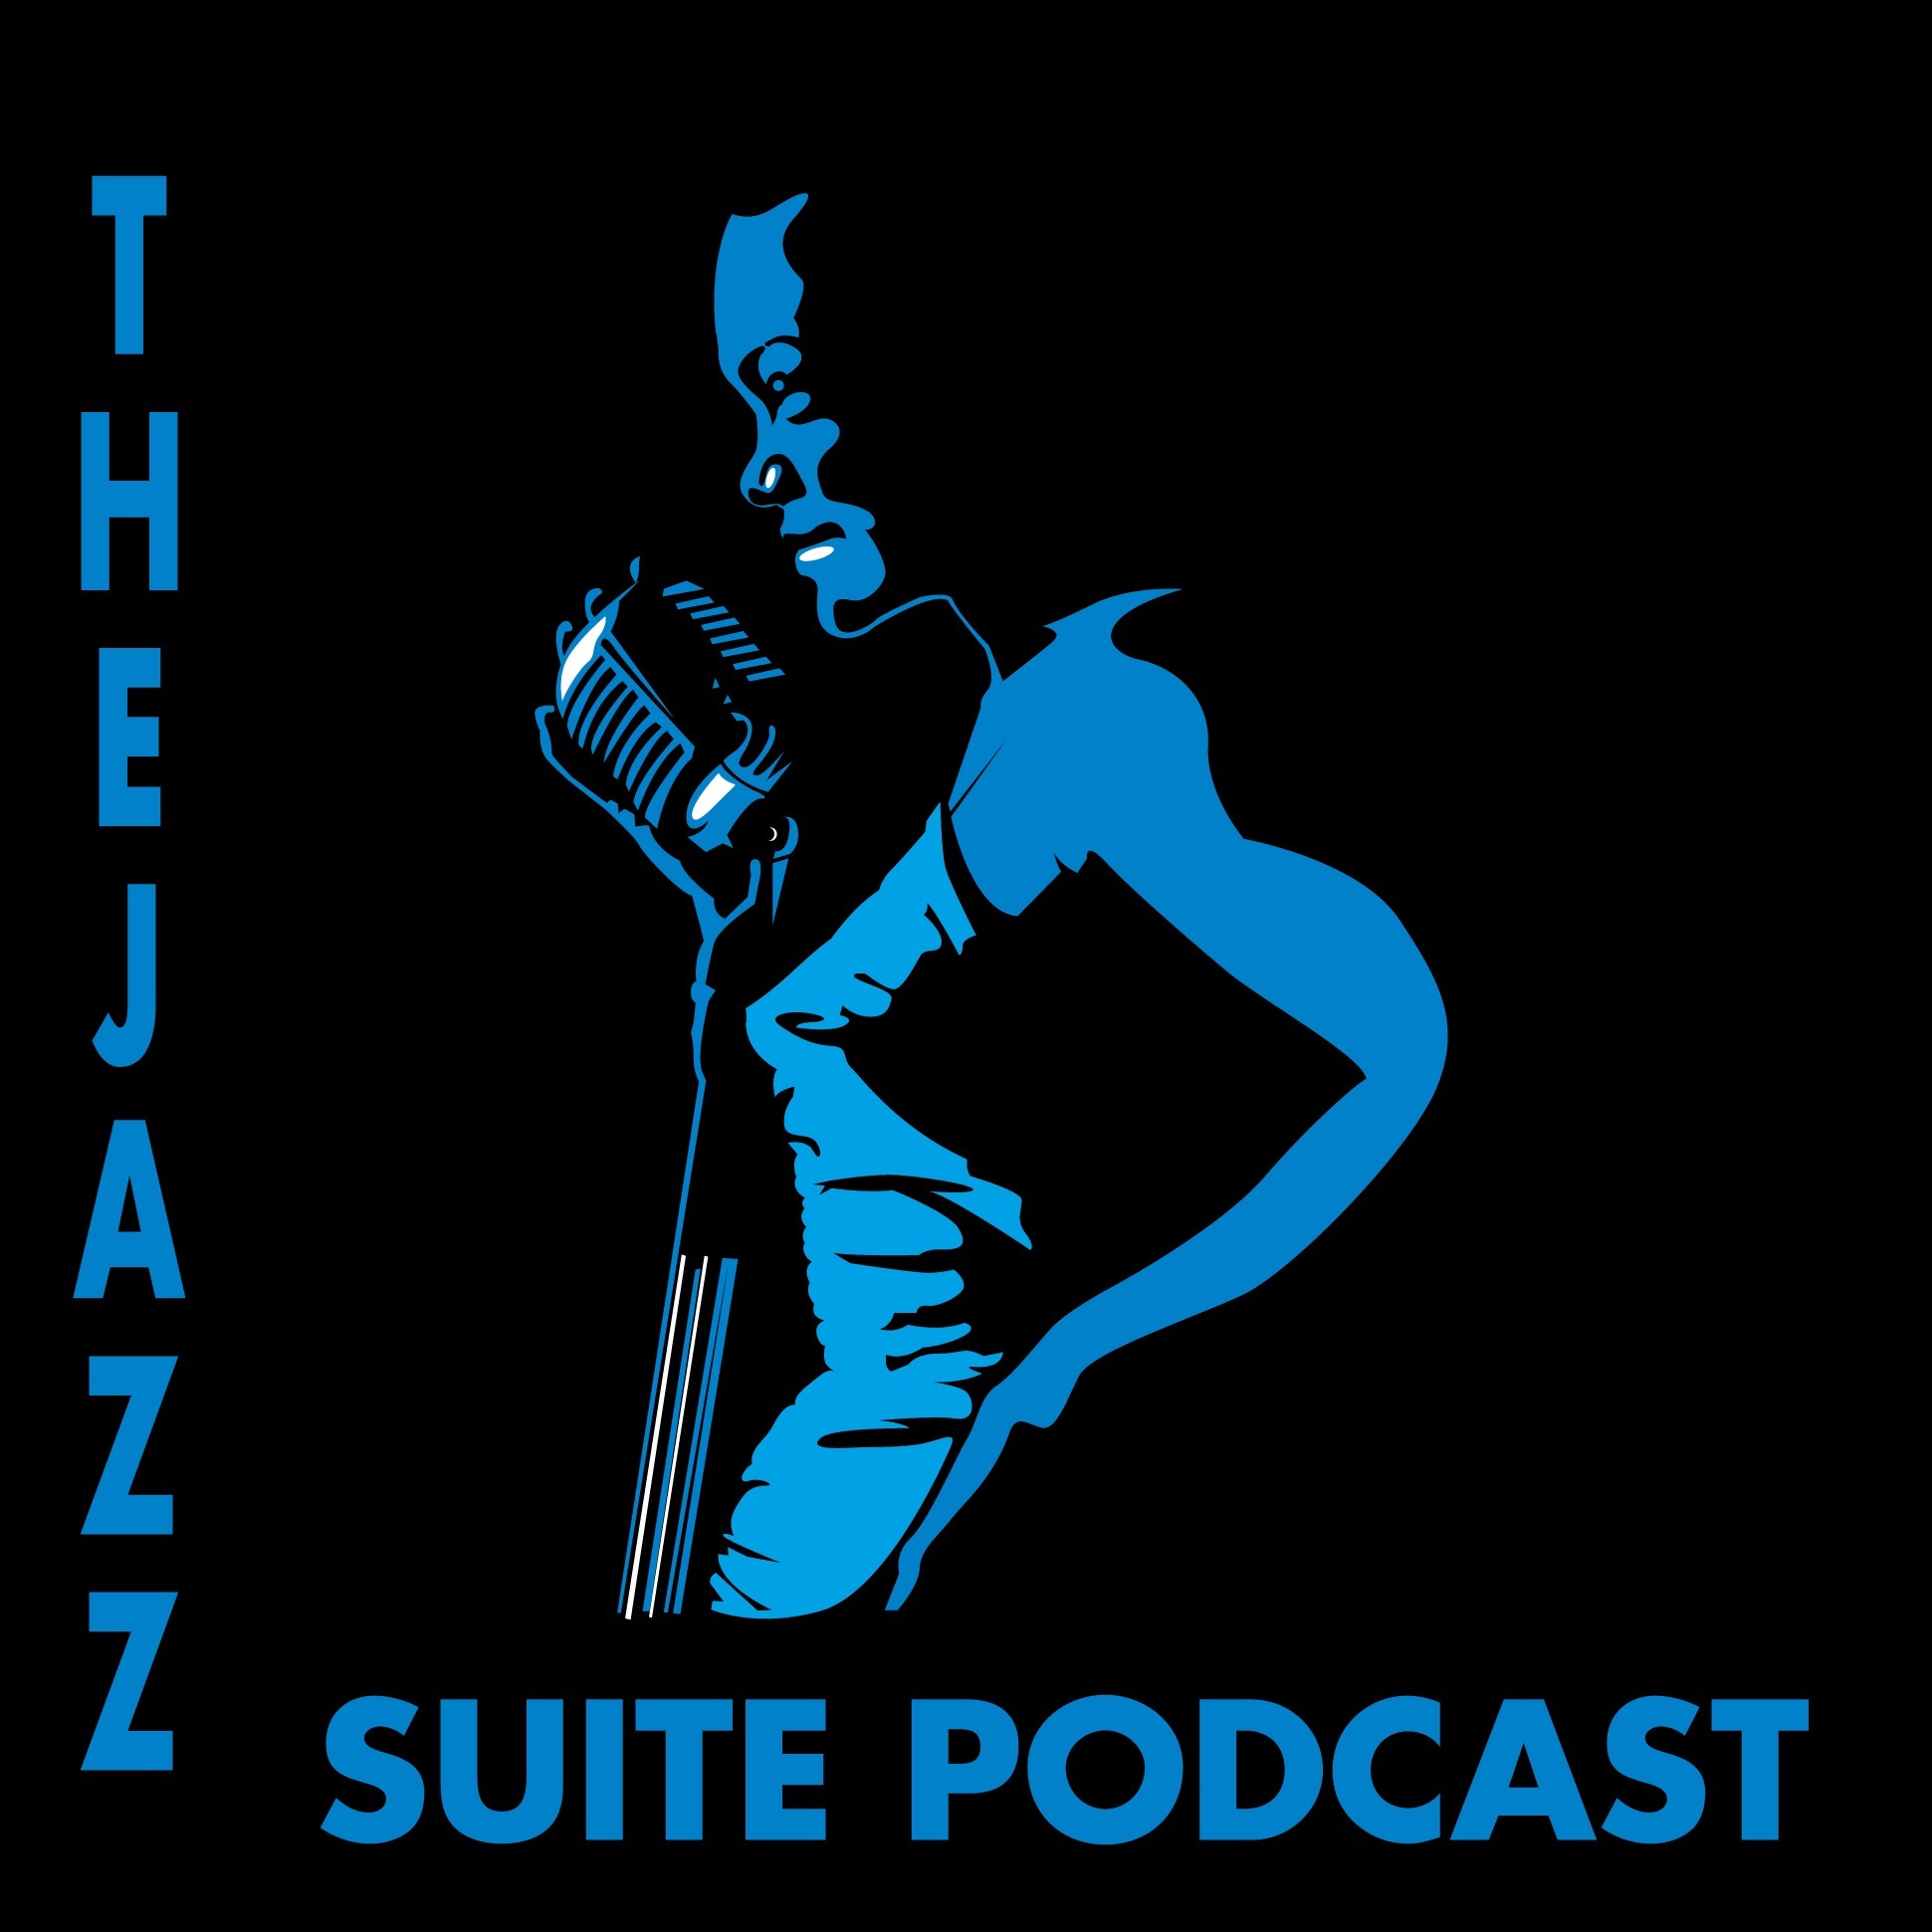 The Jazz Suite Podcast Show #463